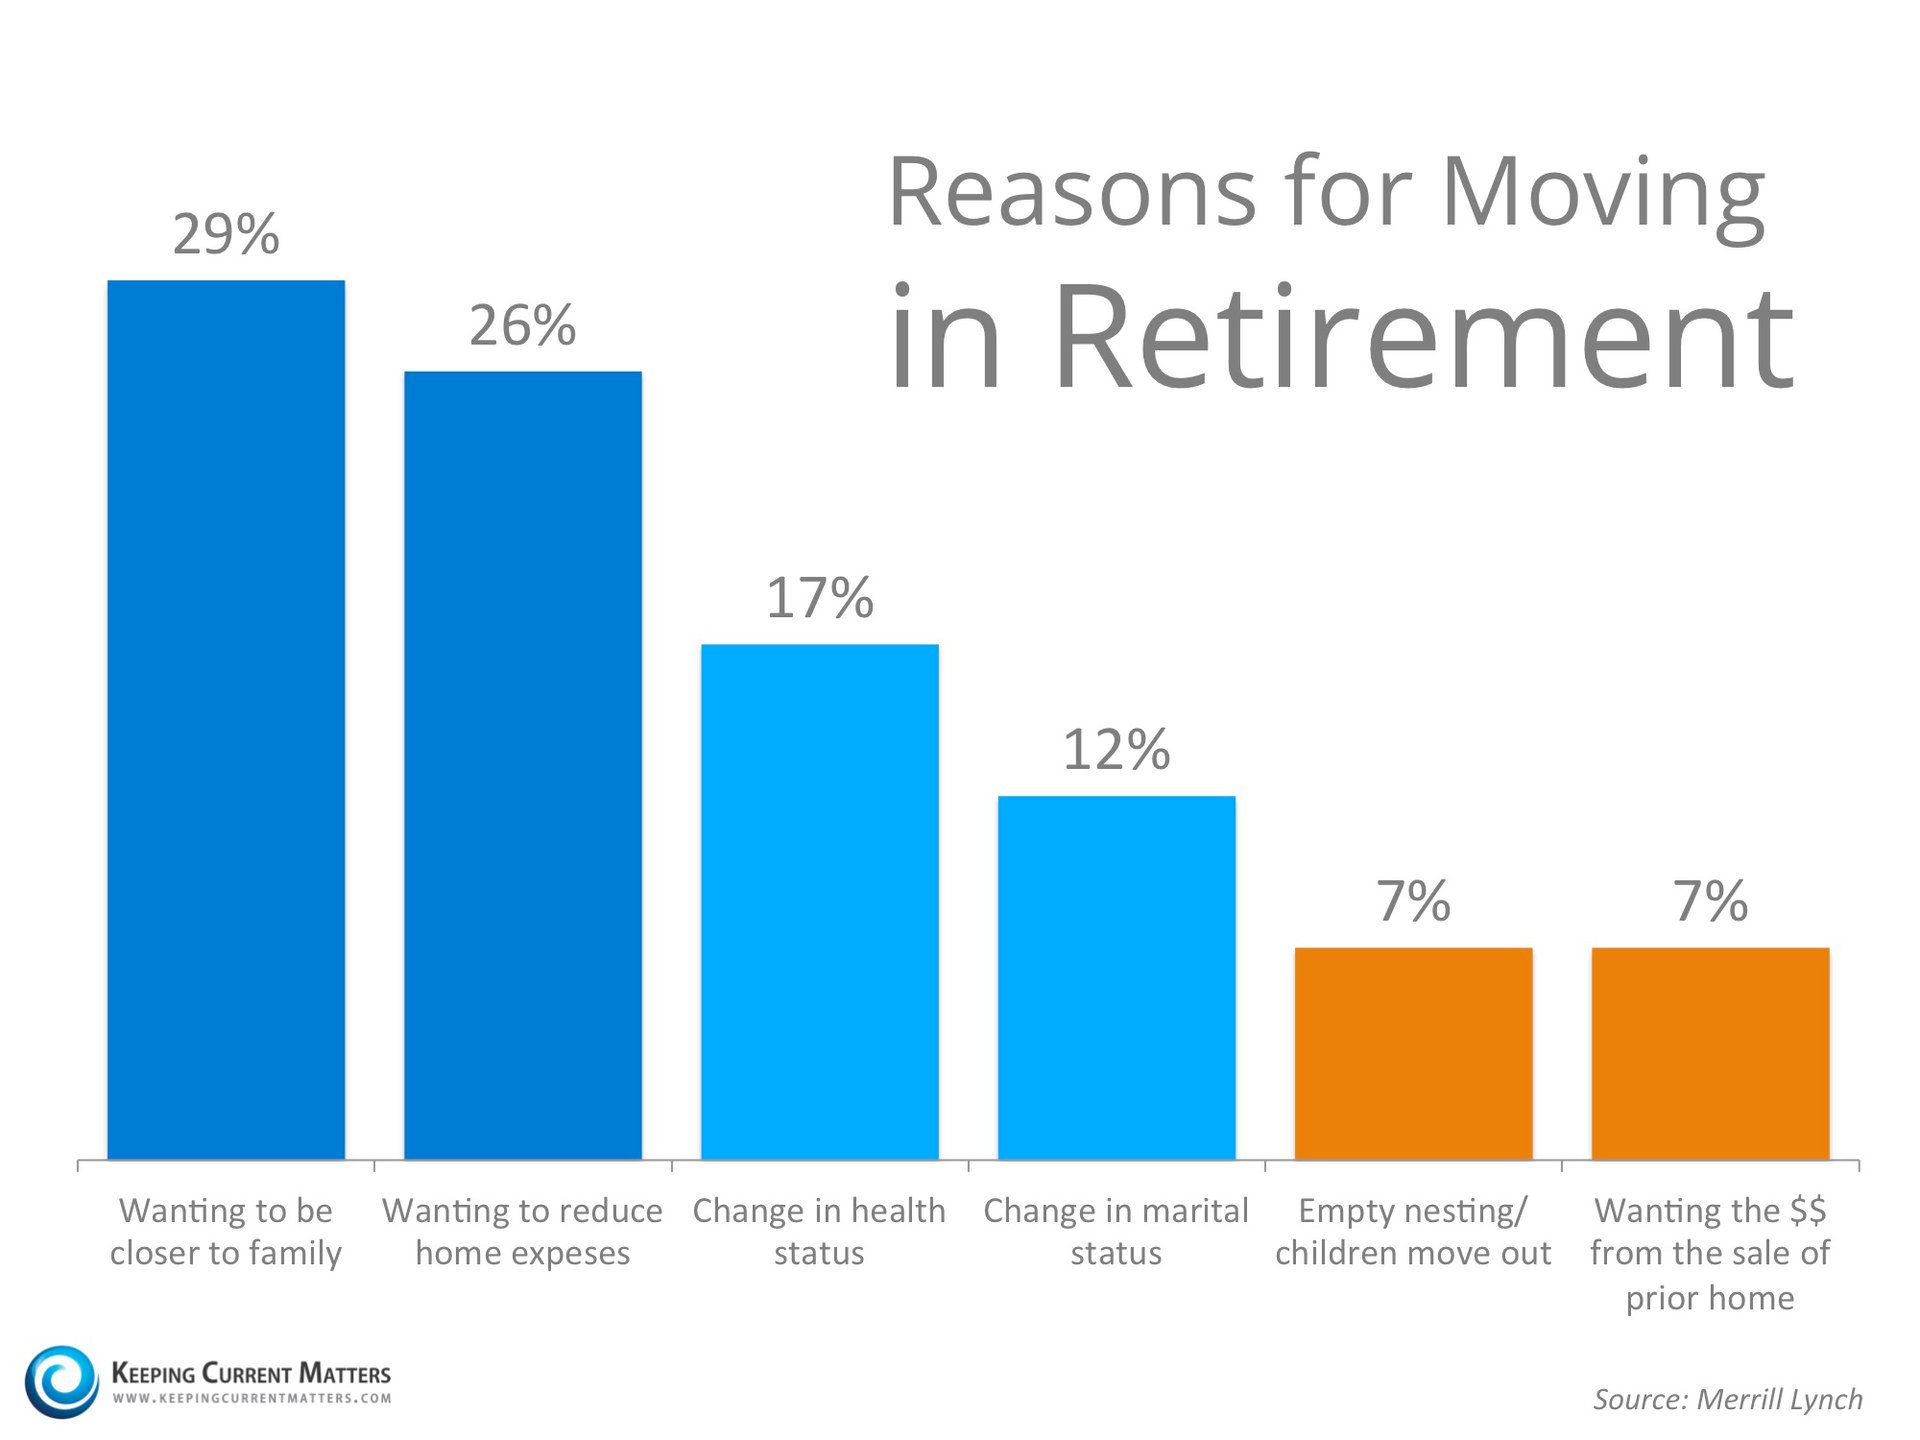 Reasons for Moving in Retirement